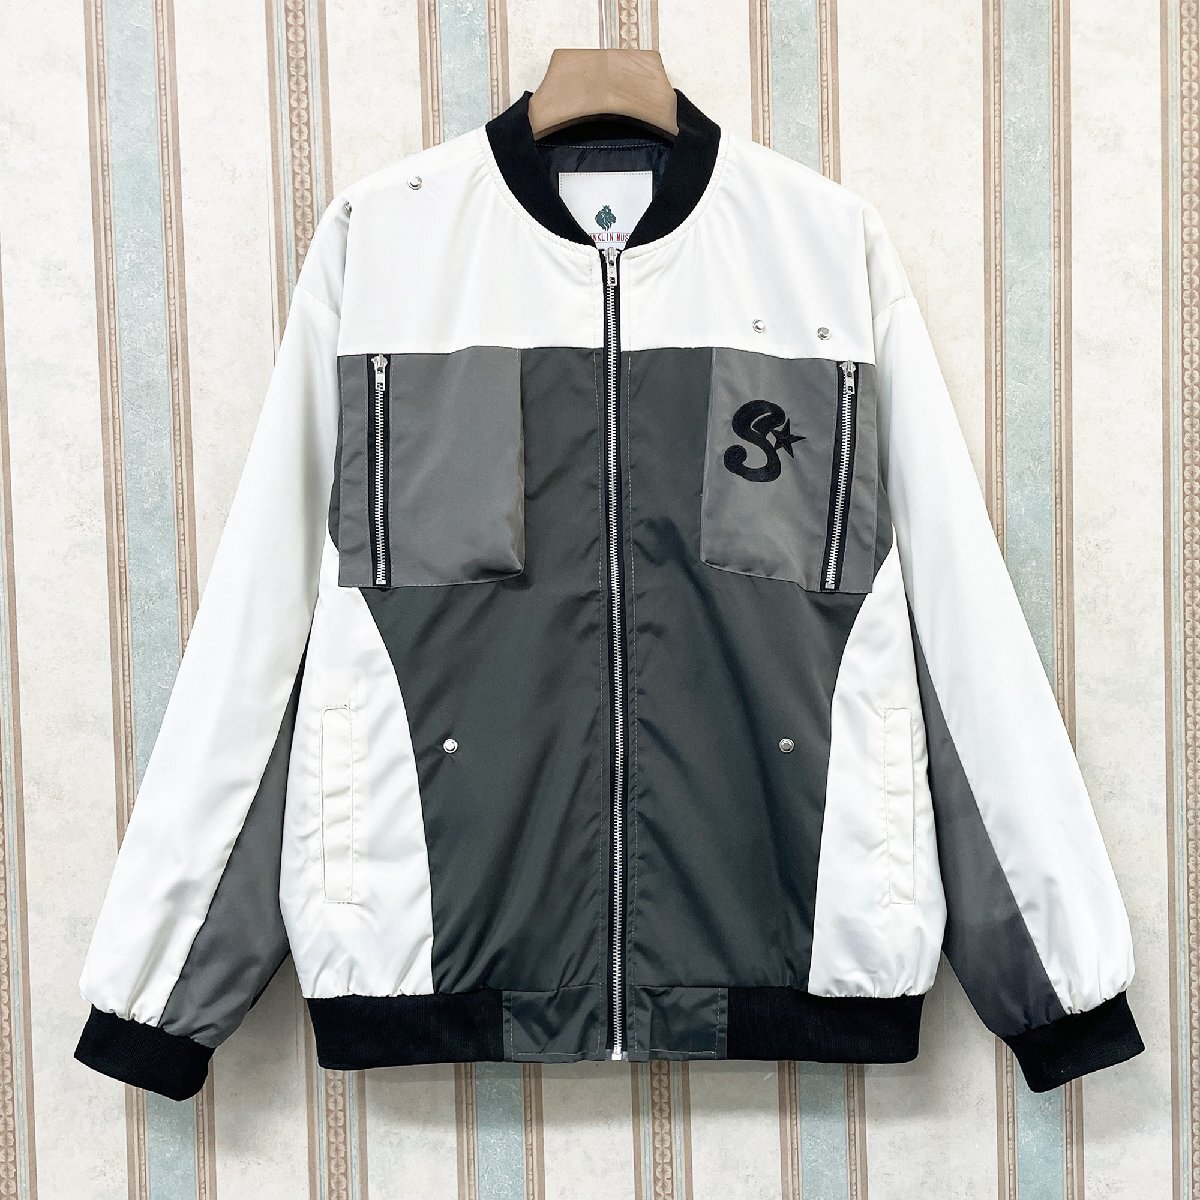  high grade regular price 6 ten thousand FRANKLIN MUSK* America * New York departure jacket on goods piece . thin easy switch blouson outdoor casual 2